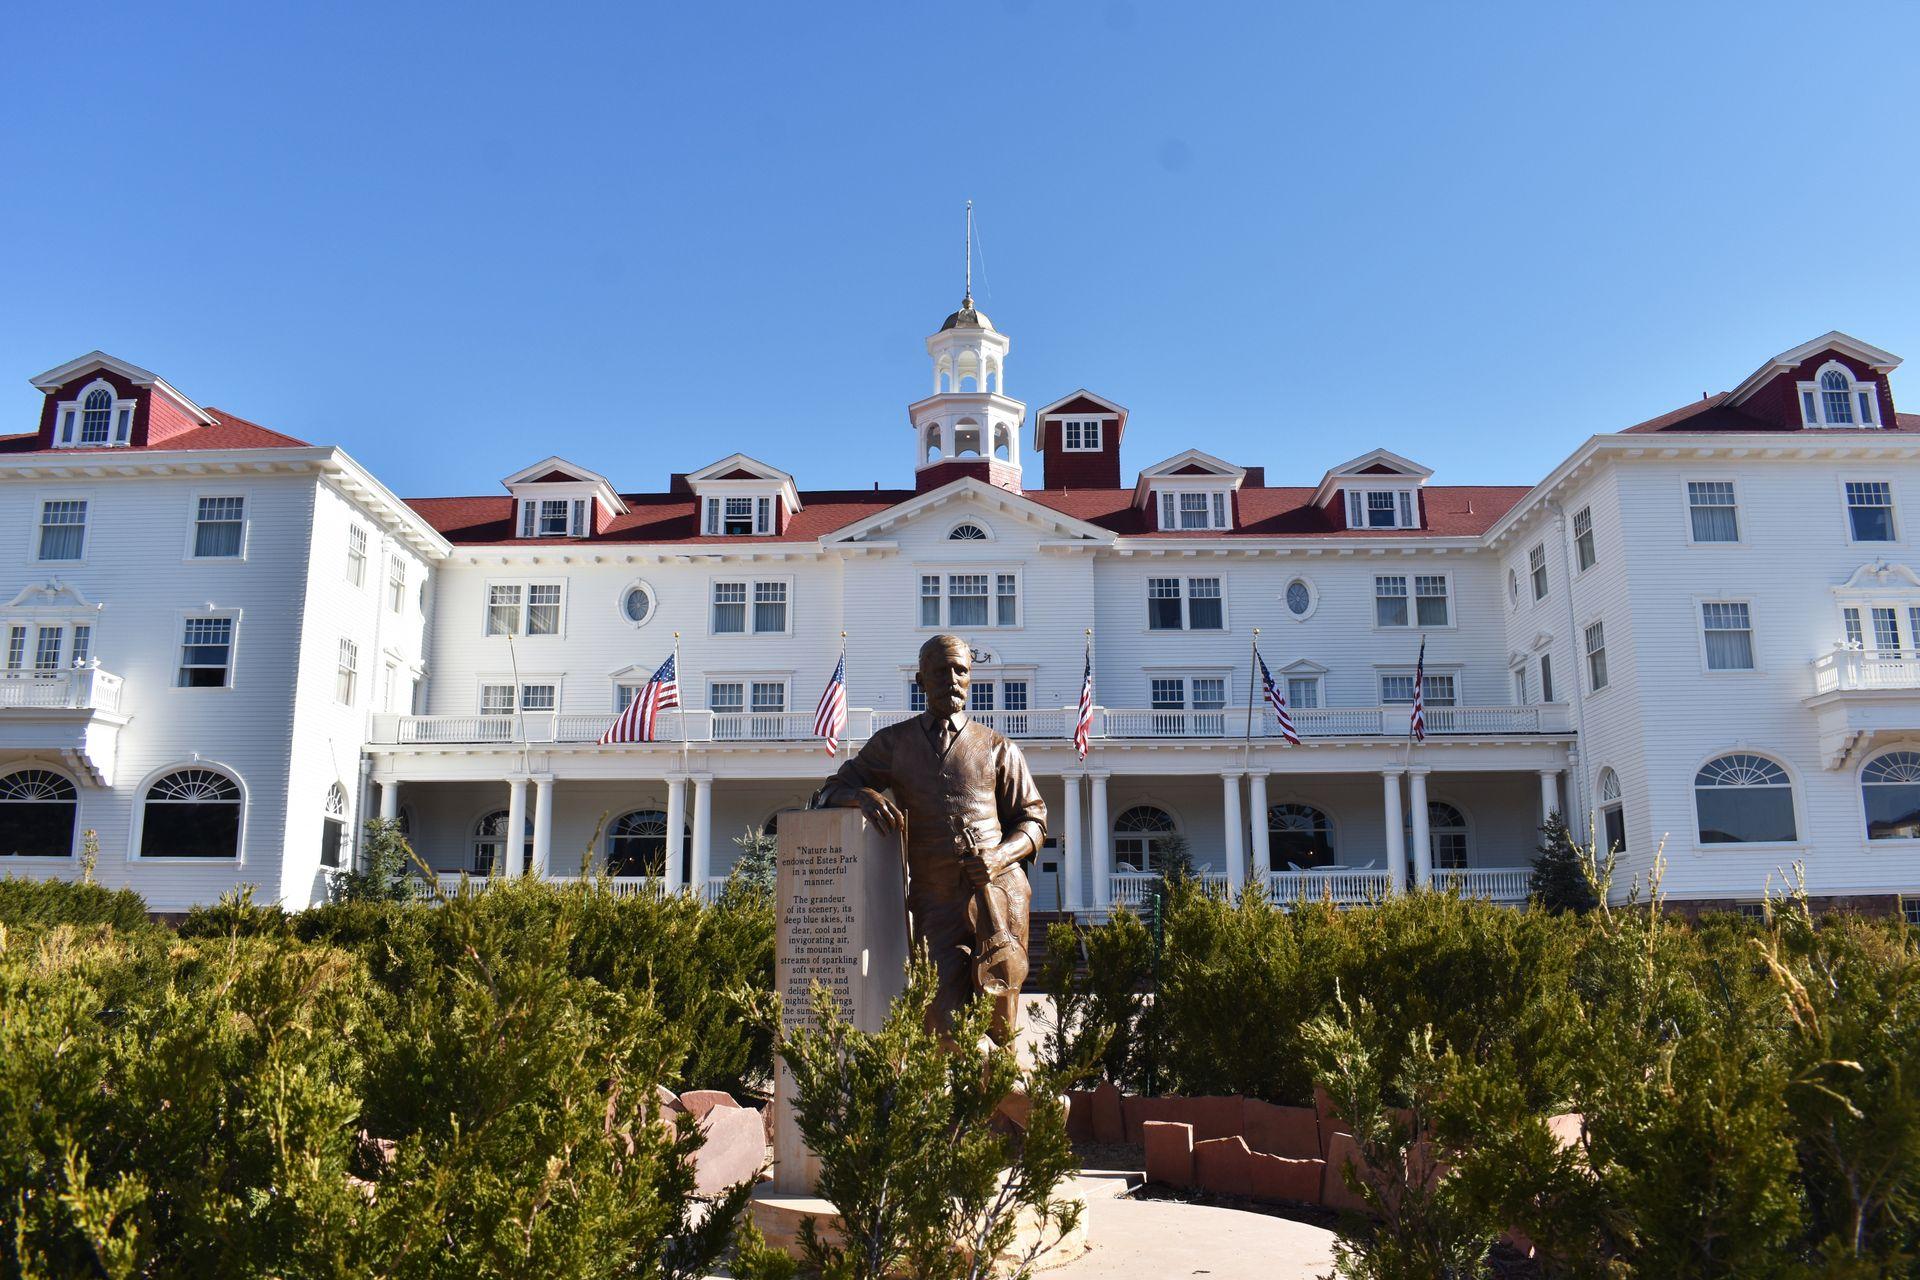 A statue of a man in front of the historic Stanley Hotel. The building is white with a red roof.